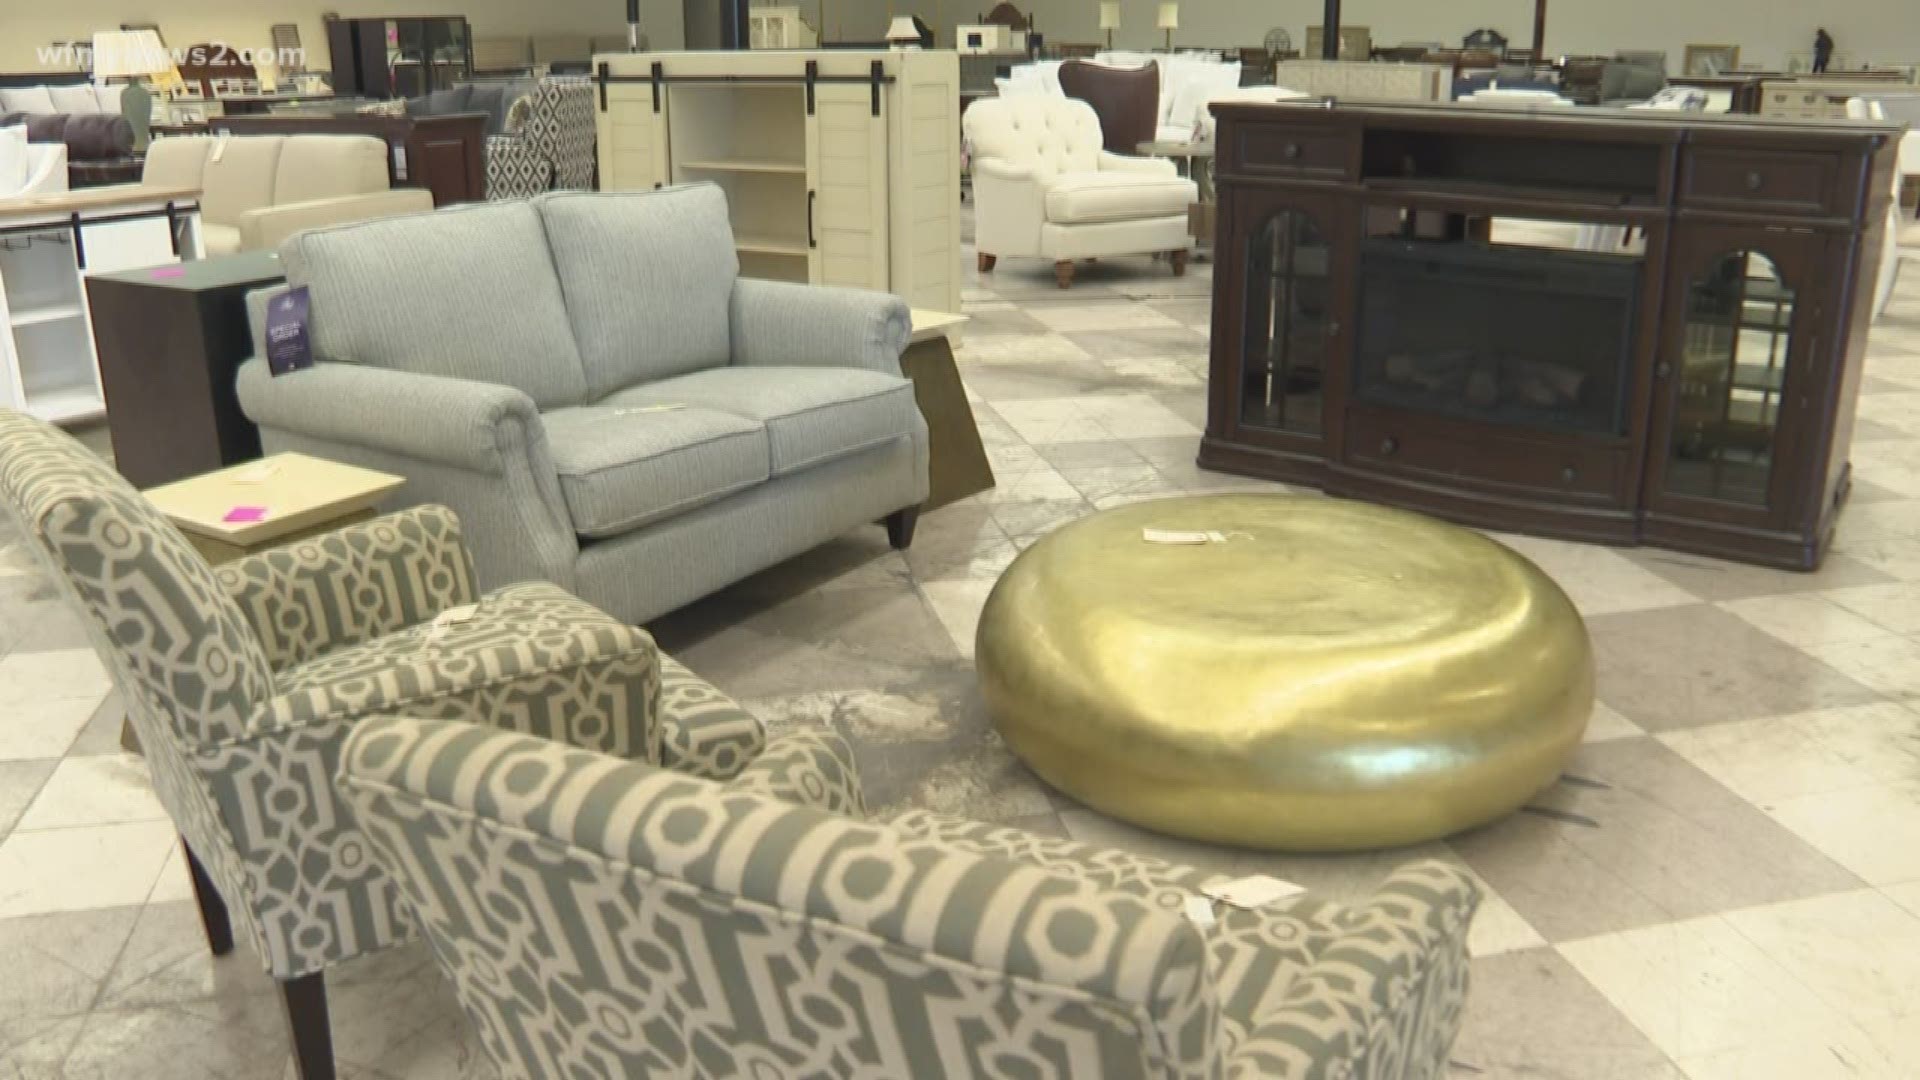 The Barnabas Network Furniture Fundraiser features new and like-new furniture donated by local retailers and manufacturers.